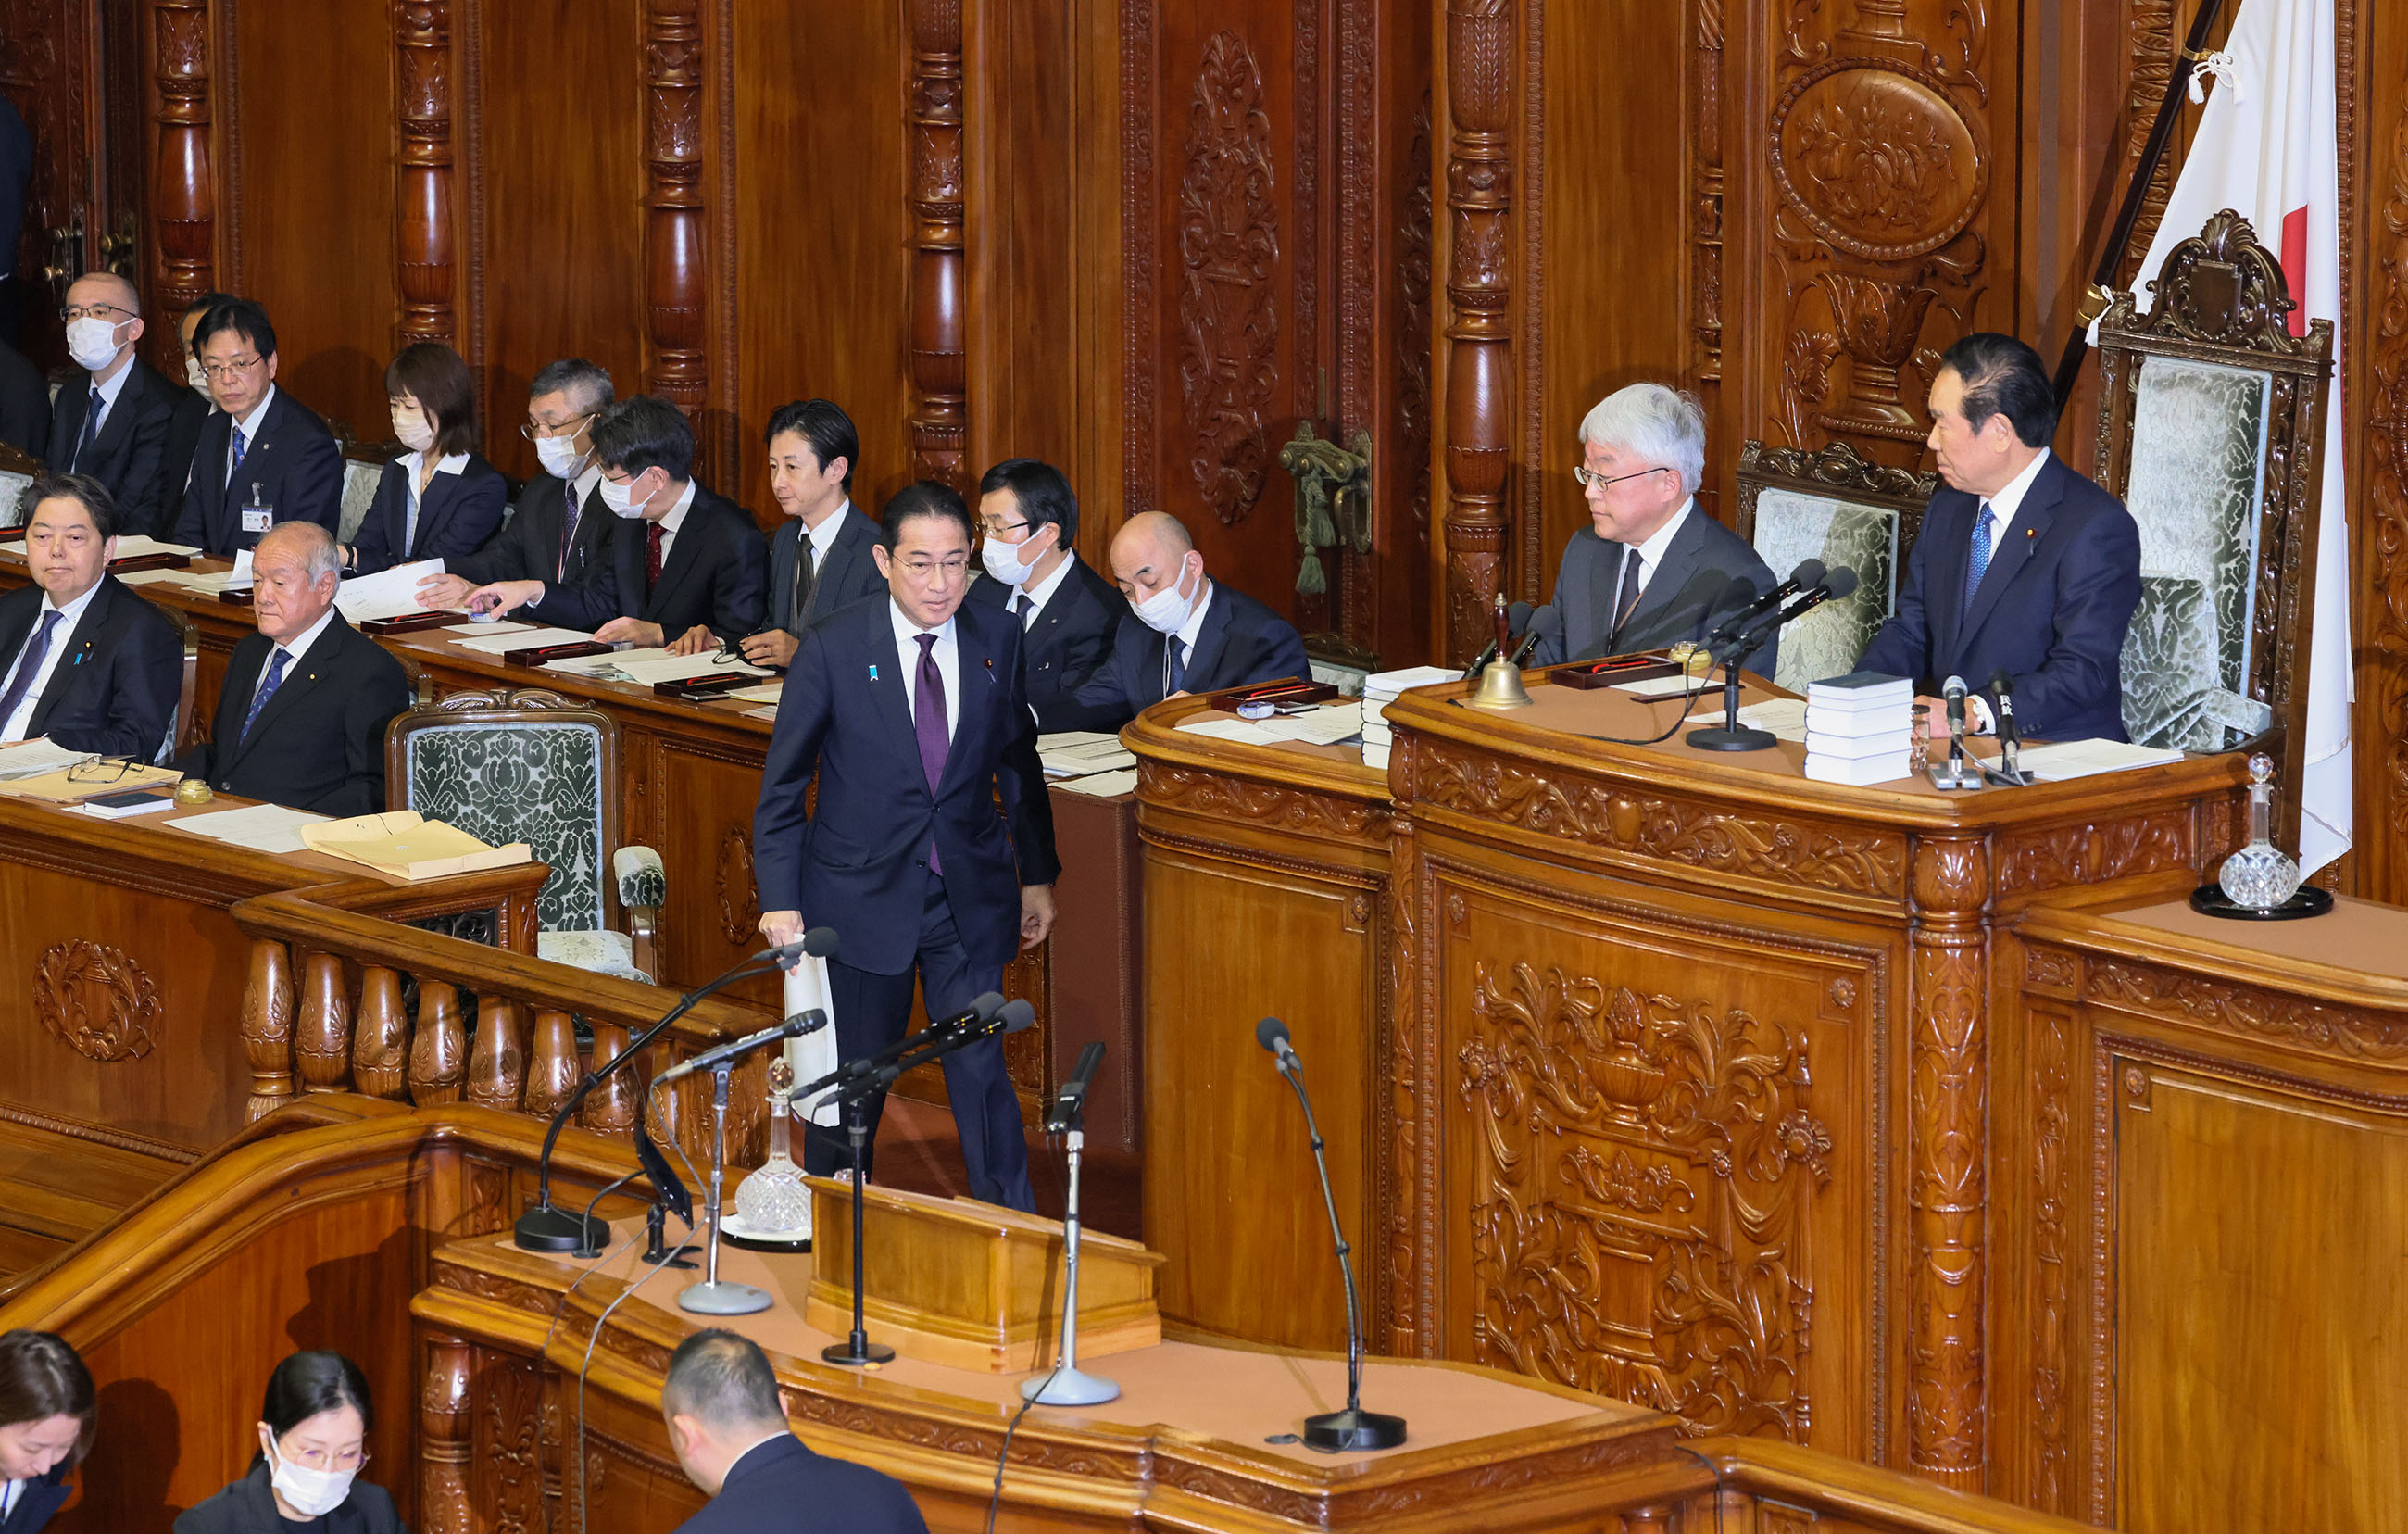 Prime Minister Kishida delivering a policy speech during the plenary session of the House of Representatives (2)